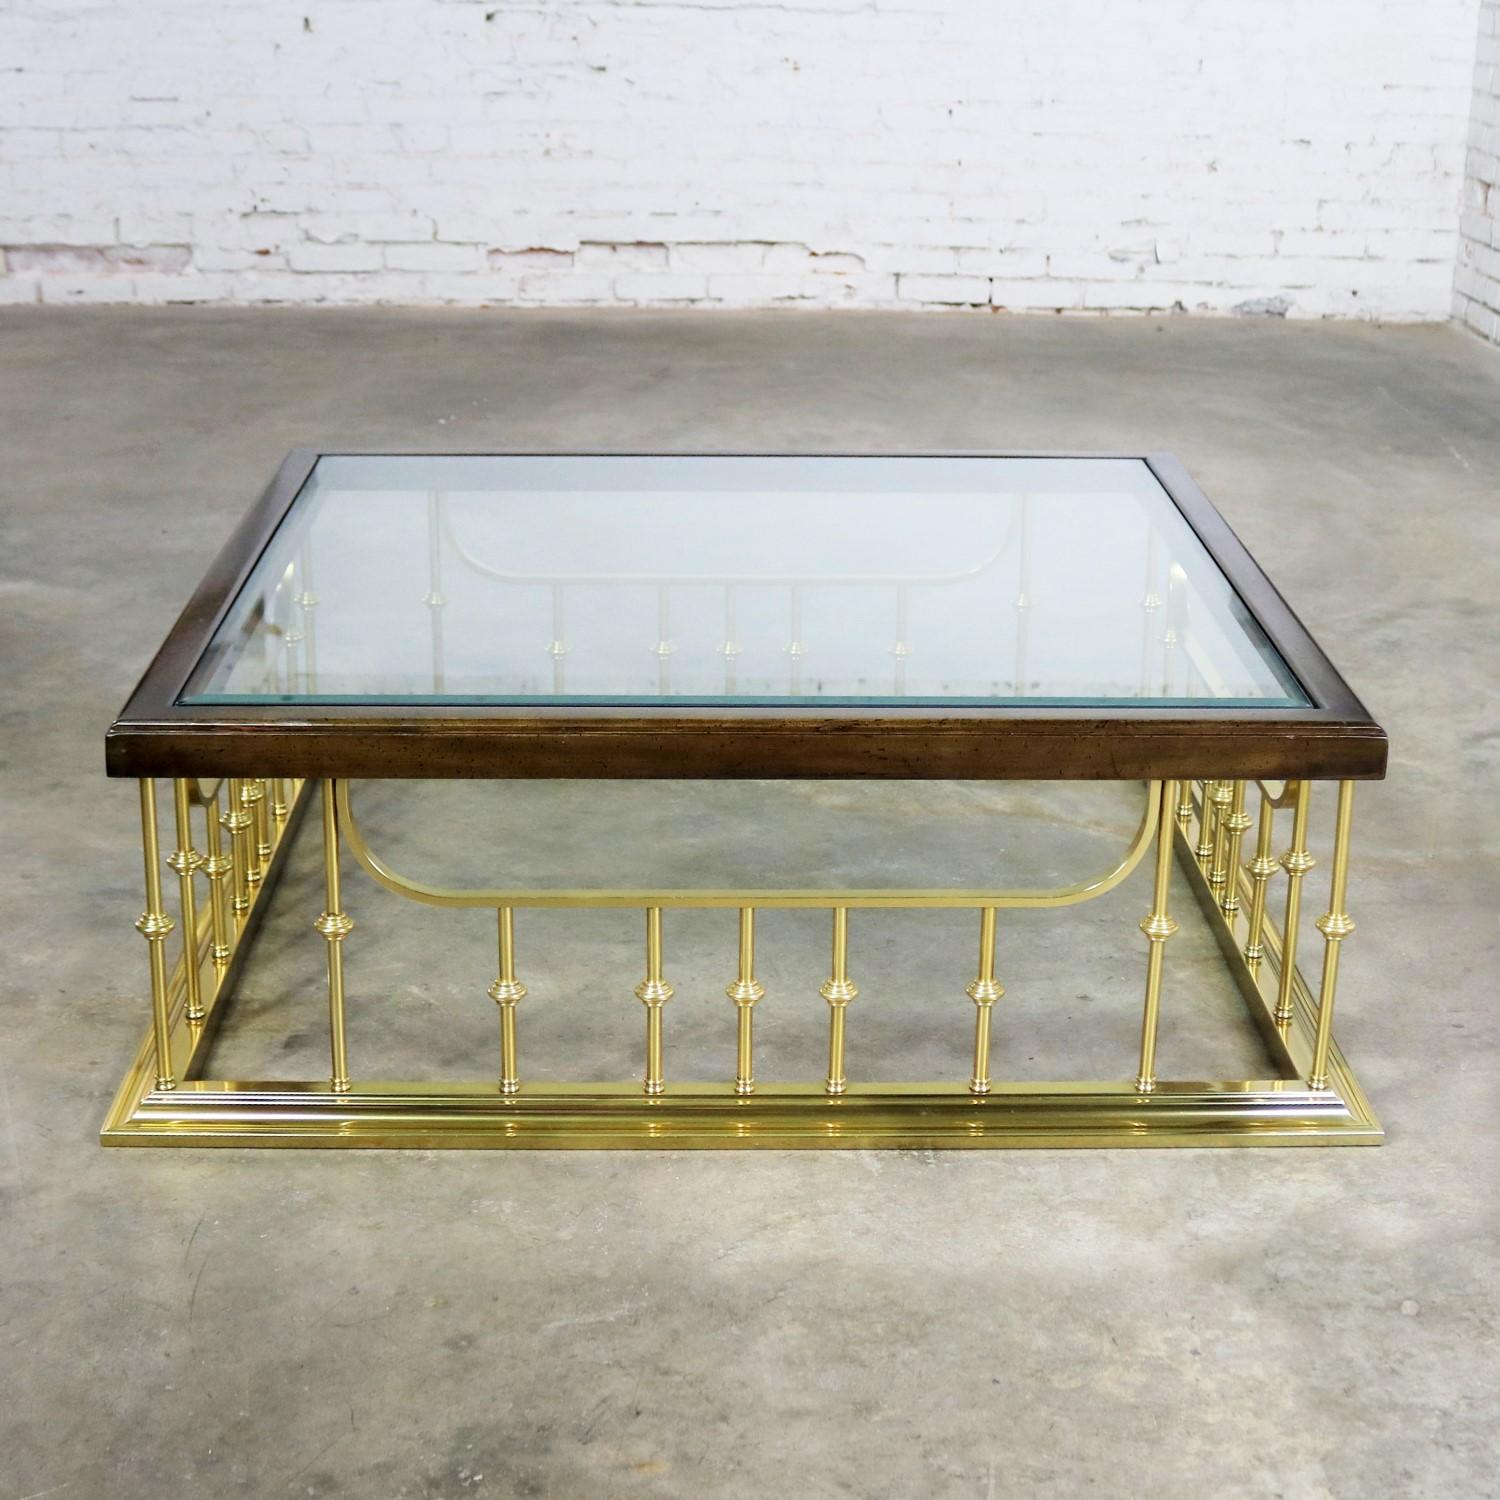 Brass Glass Wood Fireplace Fender Style Erwin Lambeth Large Square Coffee Table 9